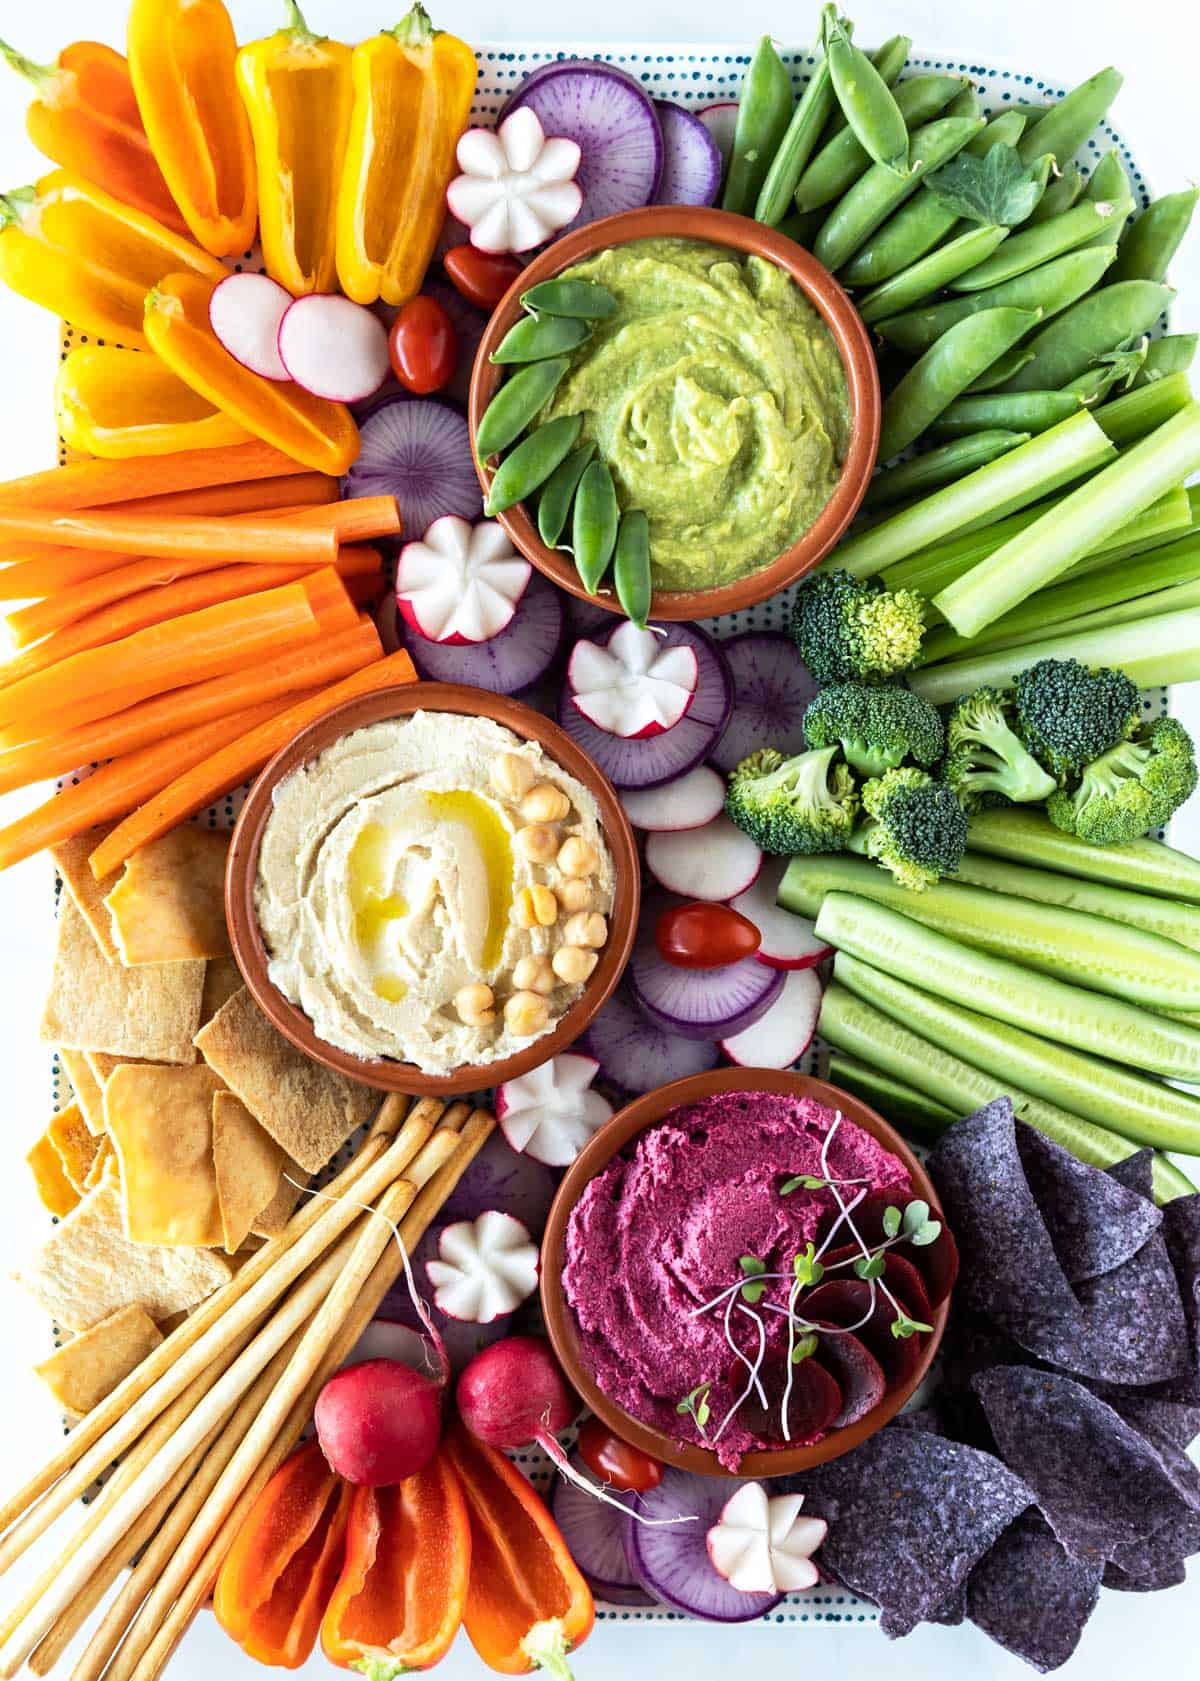 An assorted vegetable platter with three dips: green guacamole, white hummus, and purple beetroot hummus.